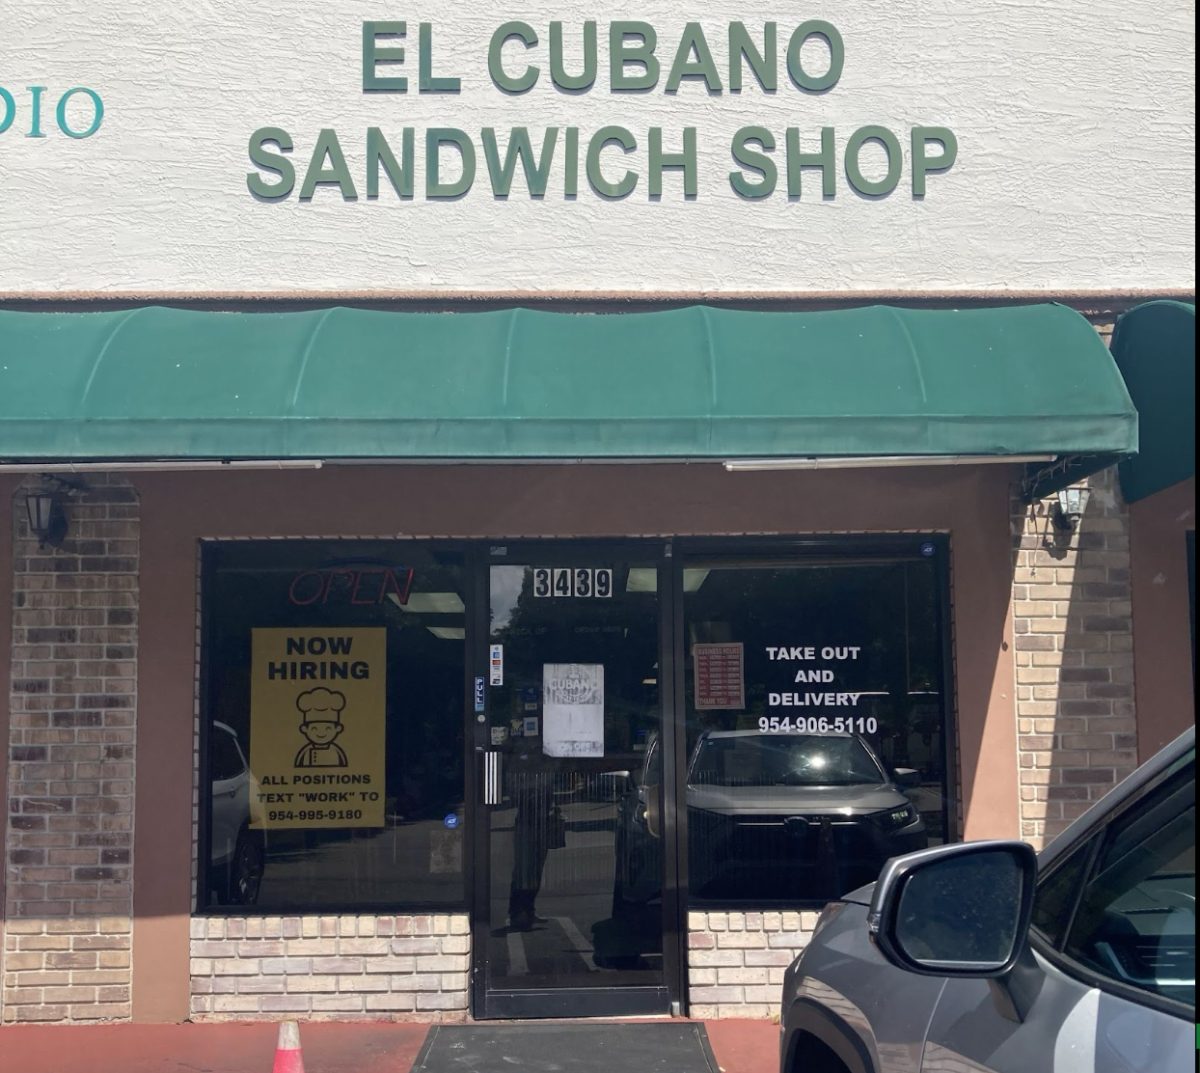 This is the El Cubano store front